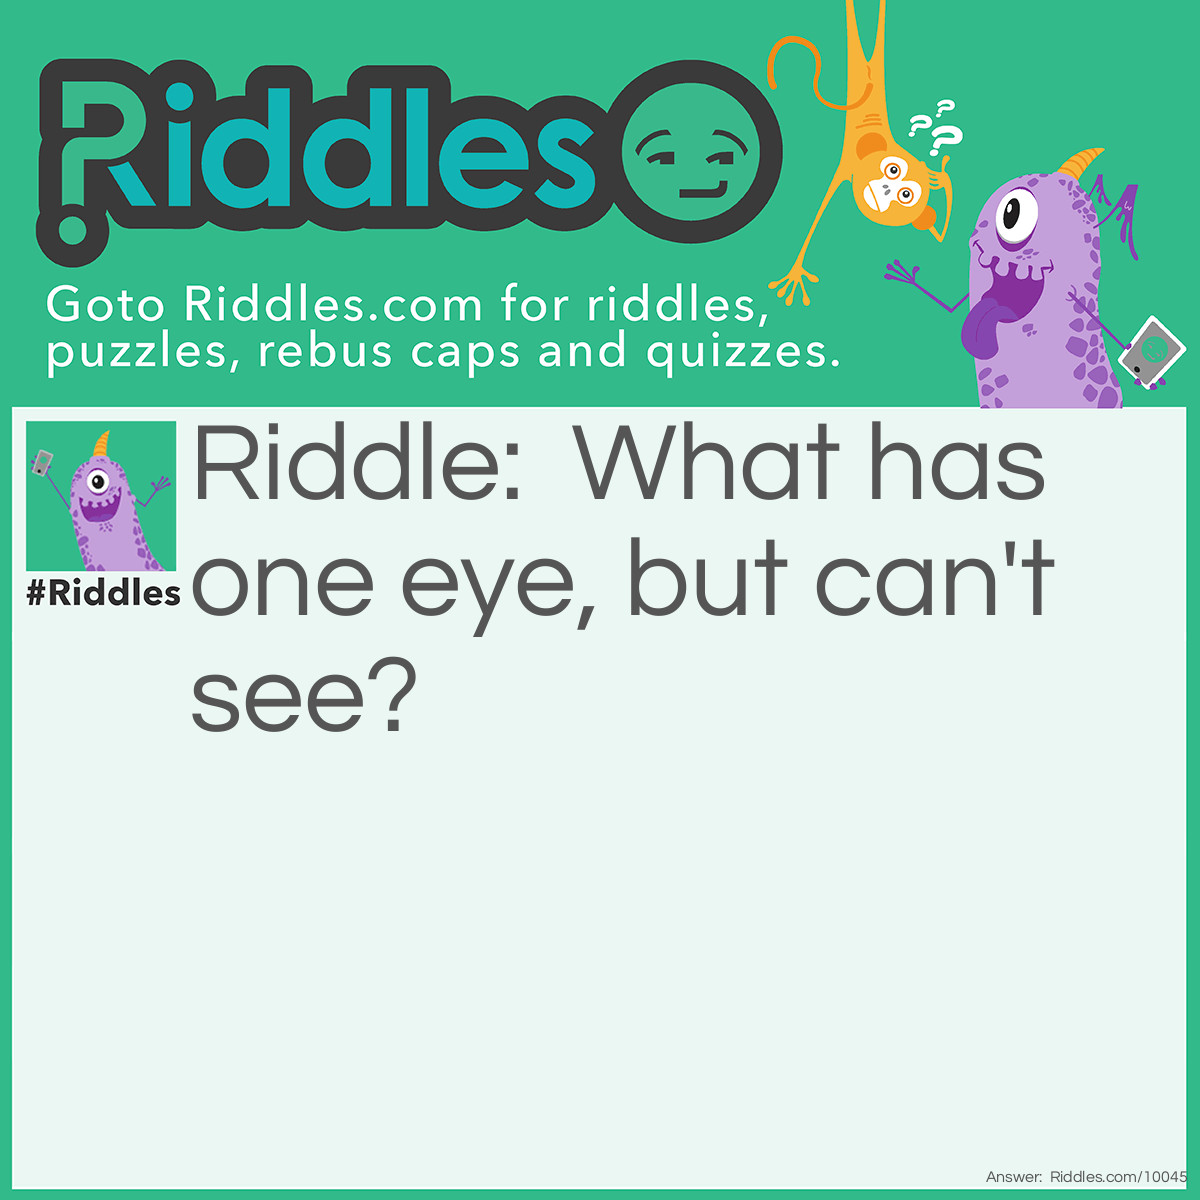 Riddle: What has one eye, but can't see? Answer: Potato.